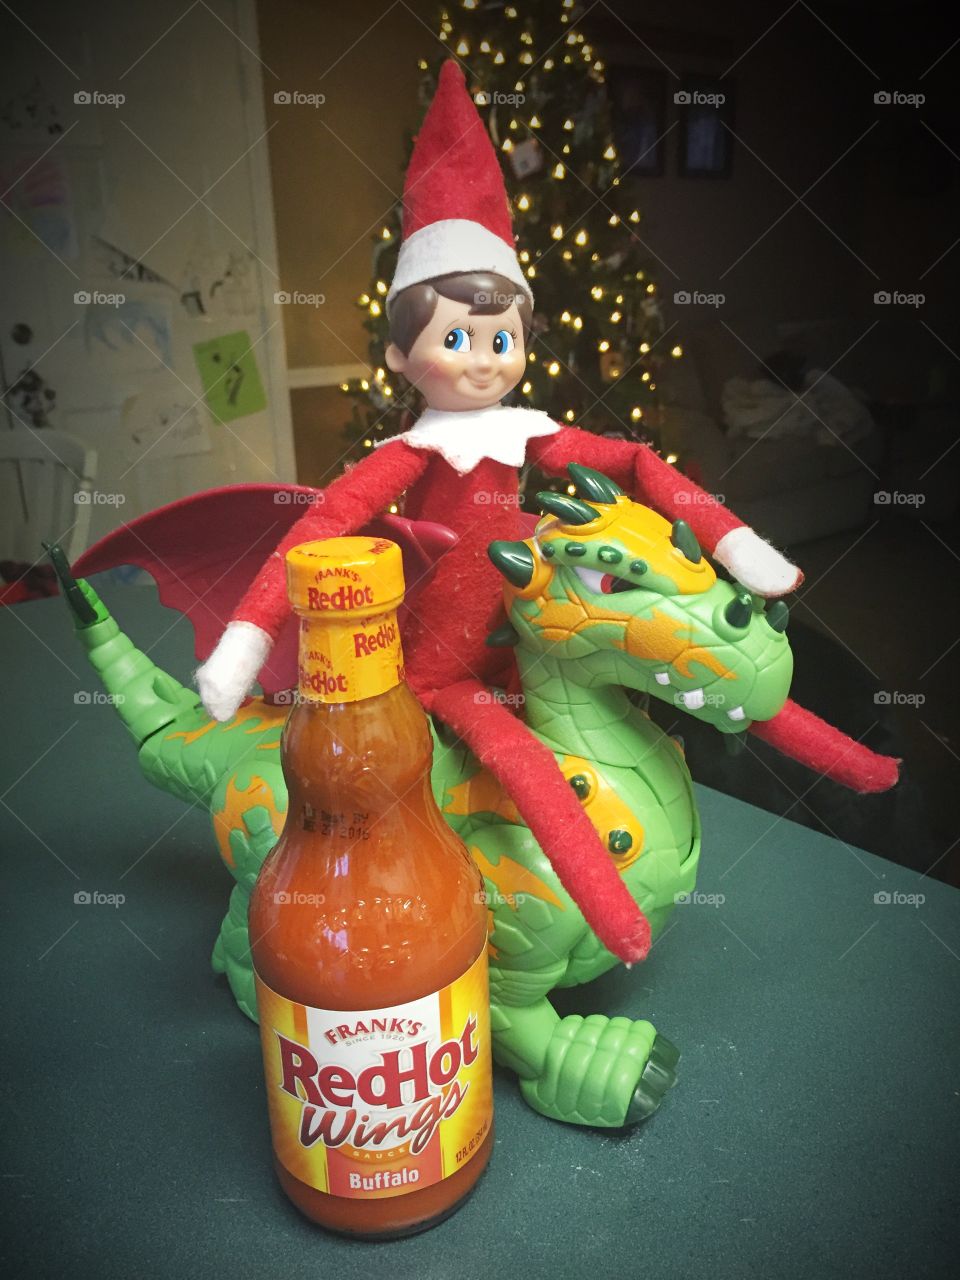 Frank's Red Hot Wings - The sauce most preferred by dragons!